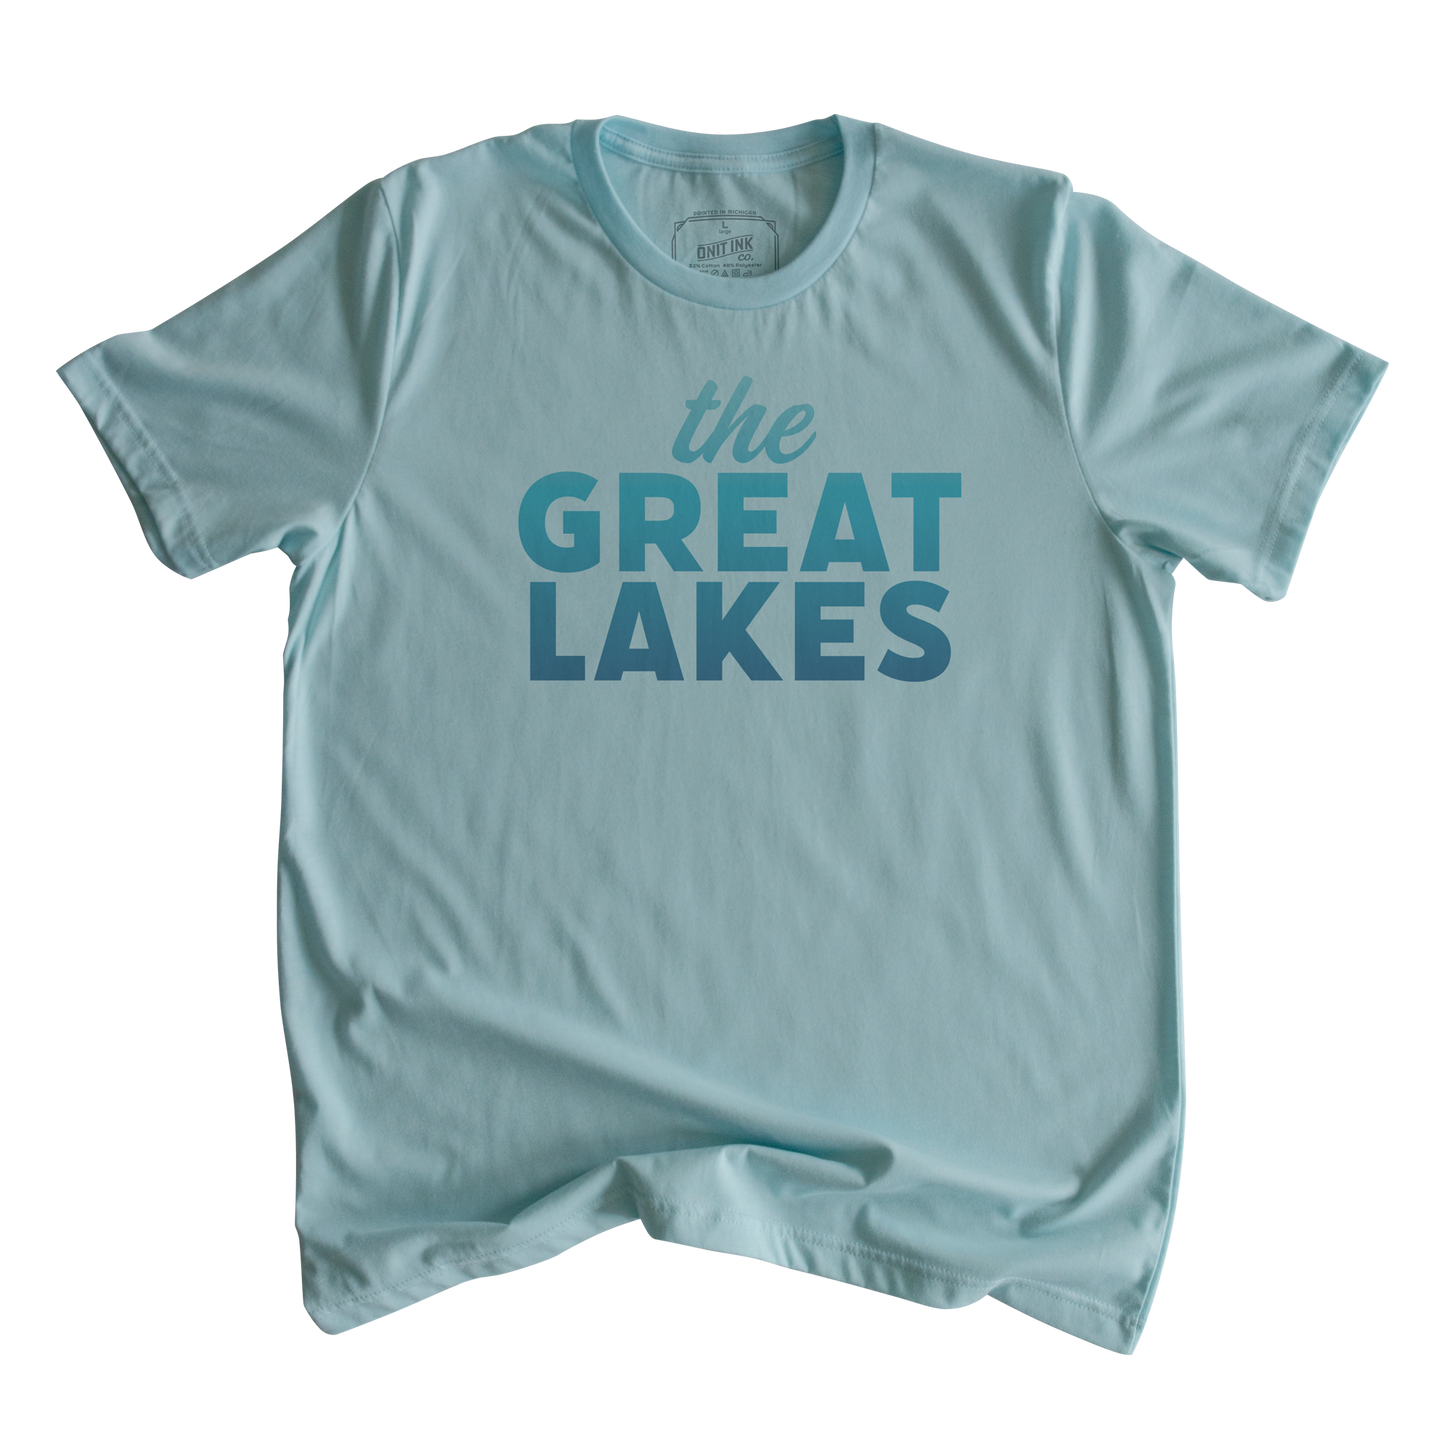 The Great Lakes T-Shirt